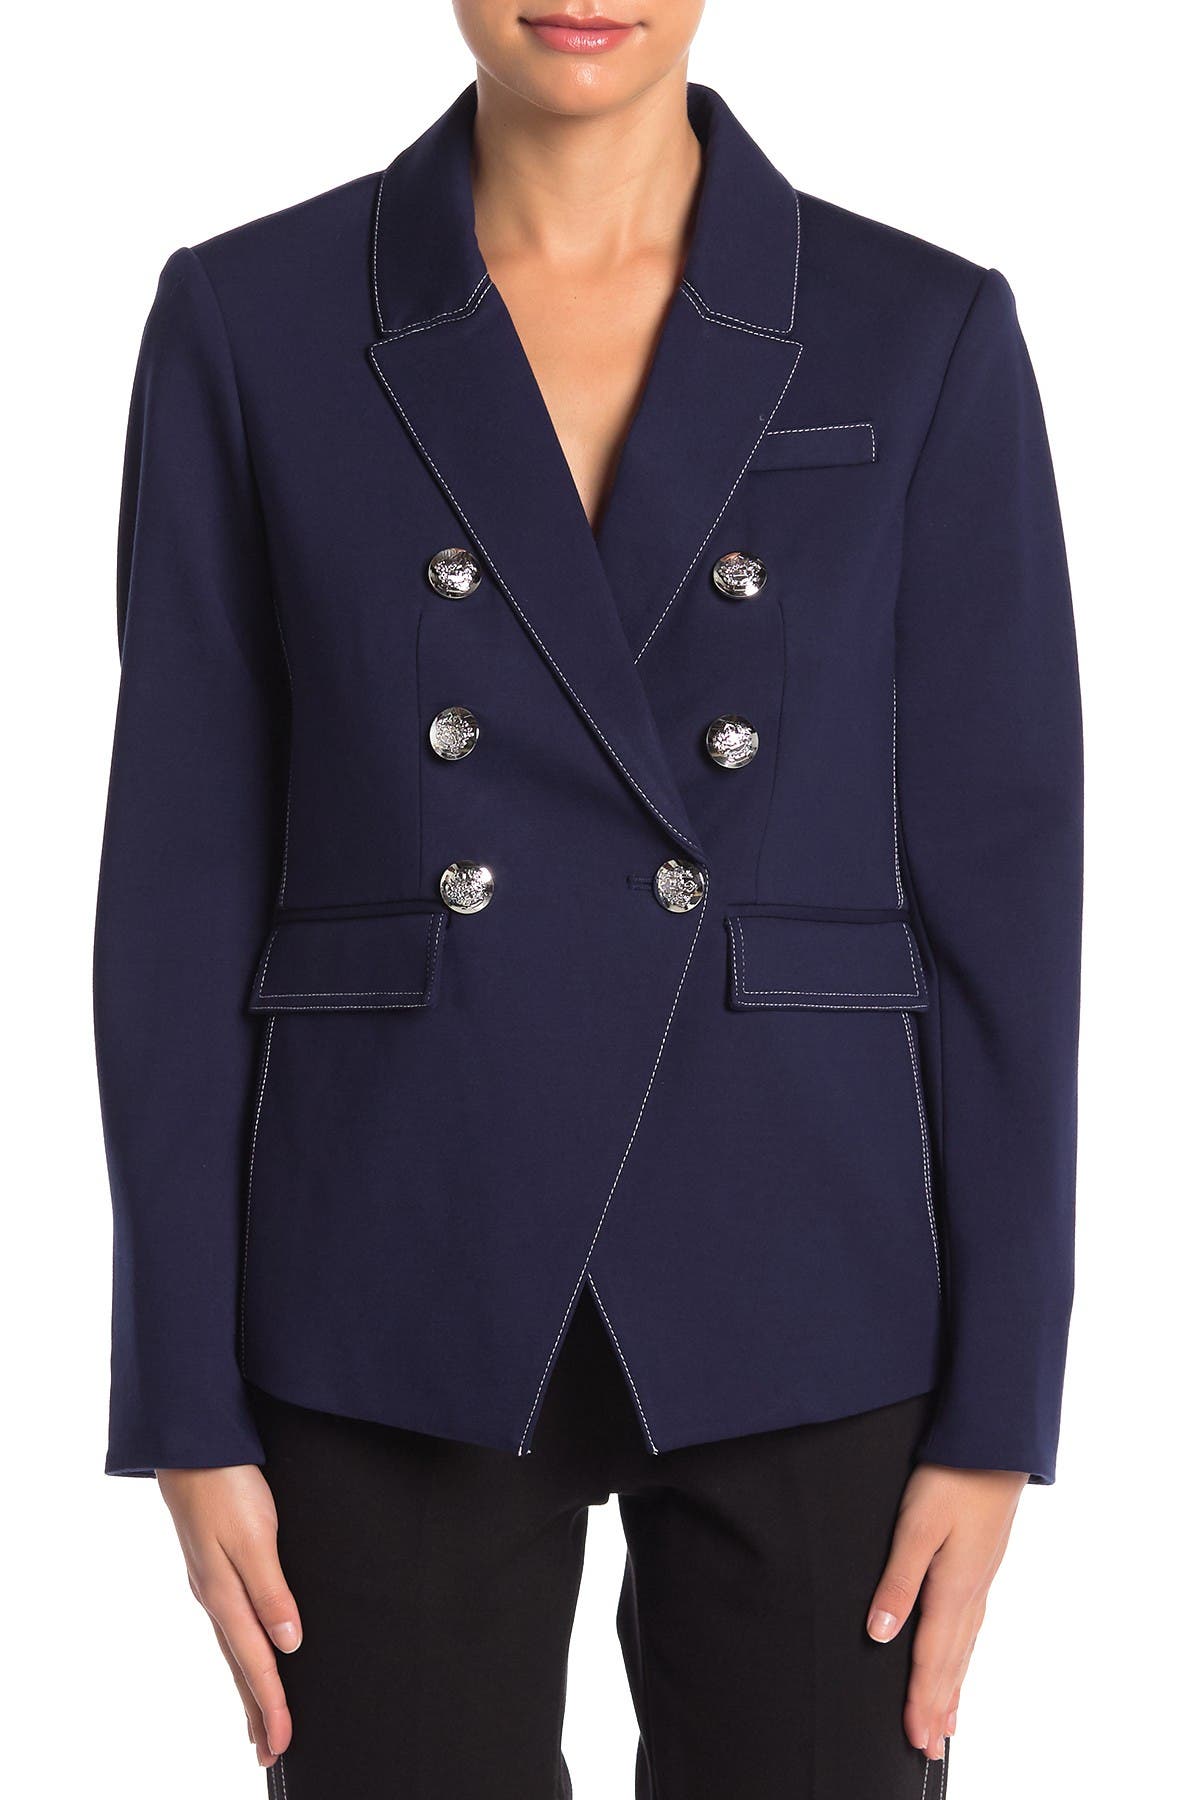 T Tahari | Double Breasted Contrast Topstitch Blazer | Nordstrom Rack